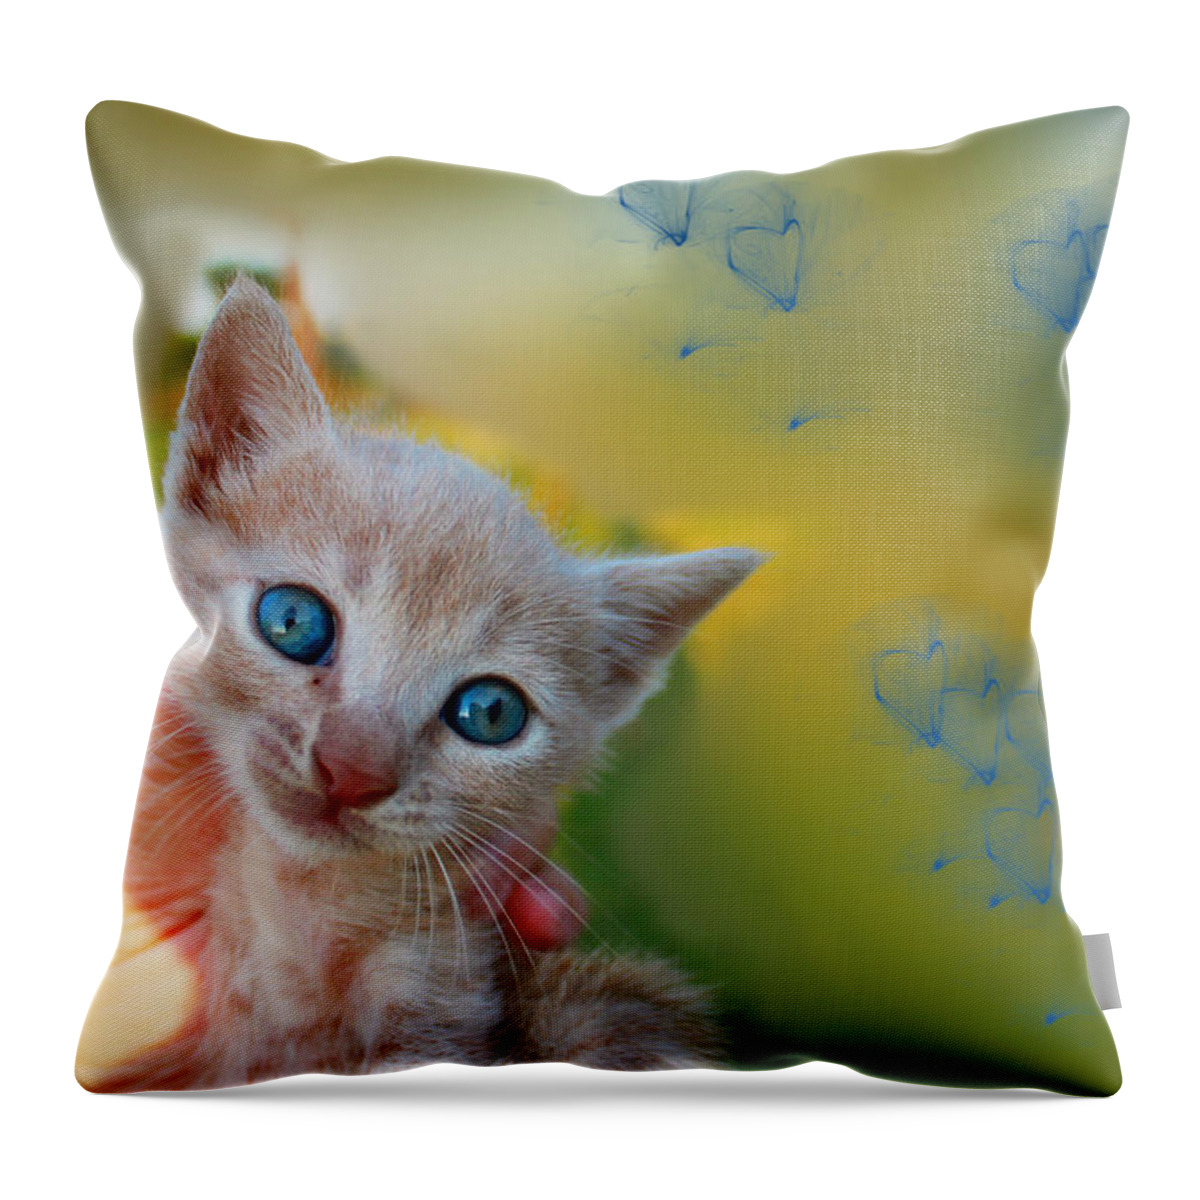 Augusta Stylianou Throw Pillow featuring the photograph Blue Eyes Kitten by Augusta Stylianou